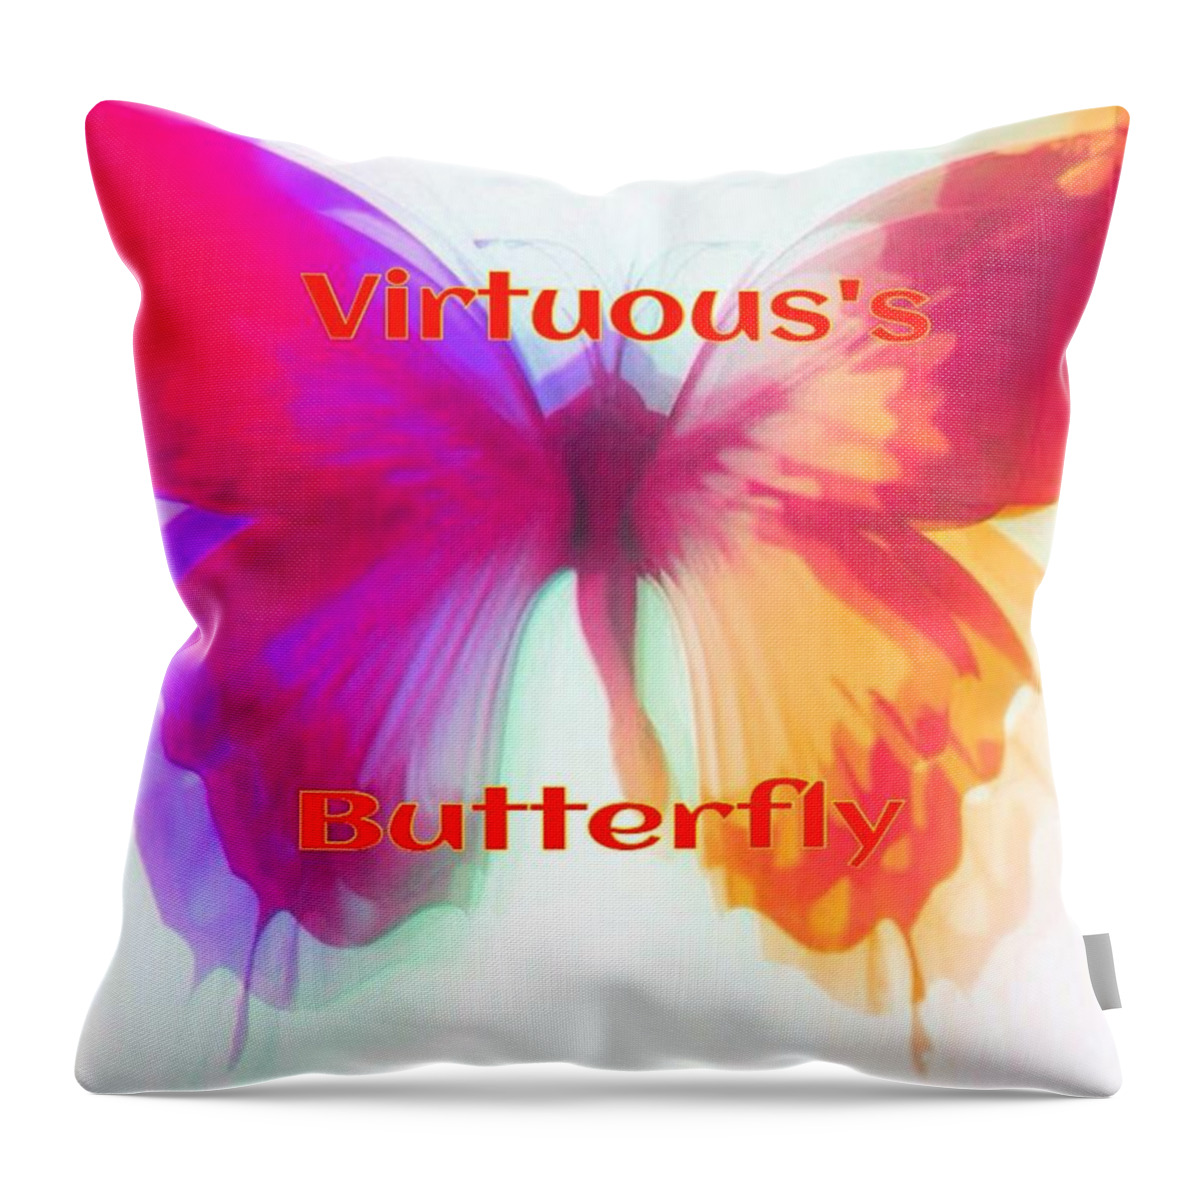 Personalized Throw Pillow Throw Pillow featuring the digital art Virtuous Butterfly by Gayle Price Thomas